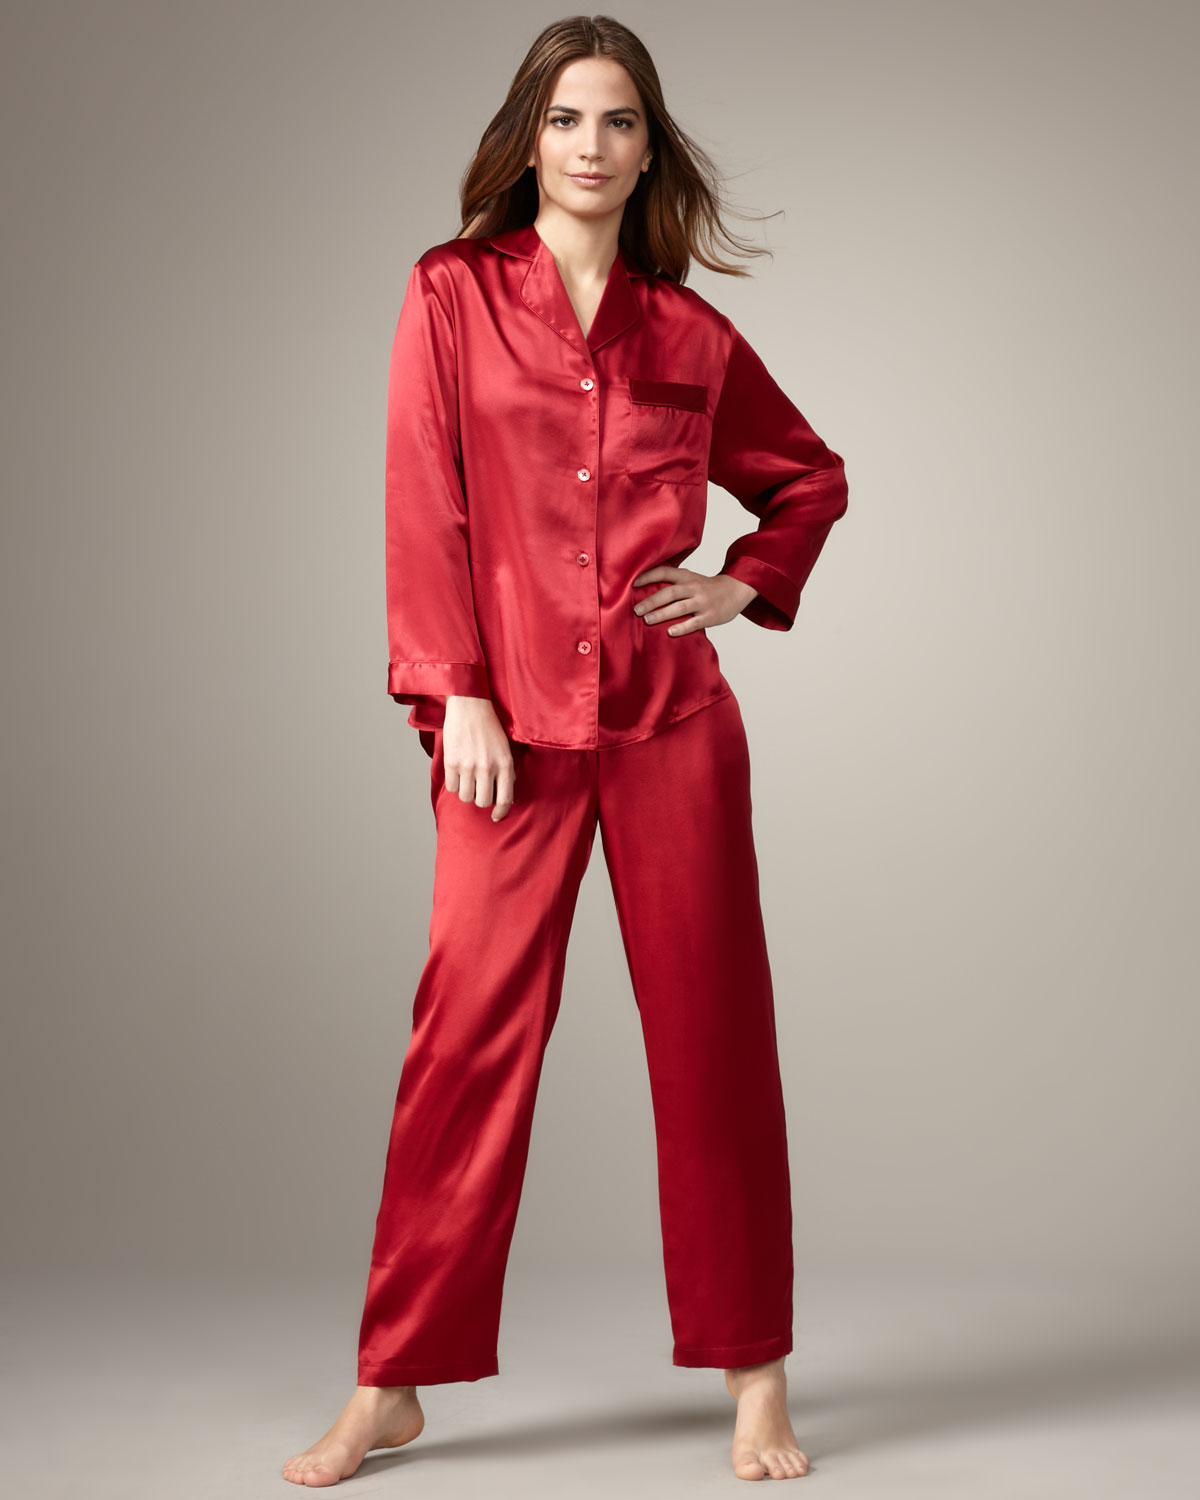 Lyst - Neiman Marcus Classic Silk Pajamas, Red in Red